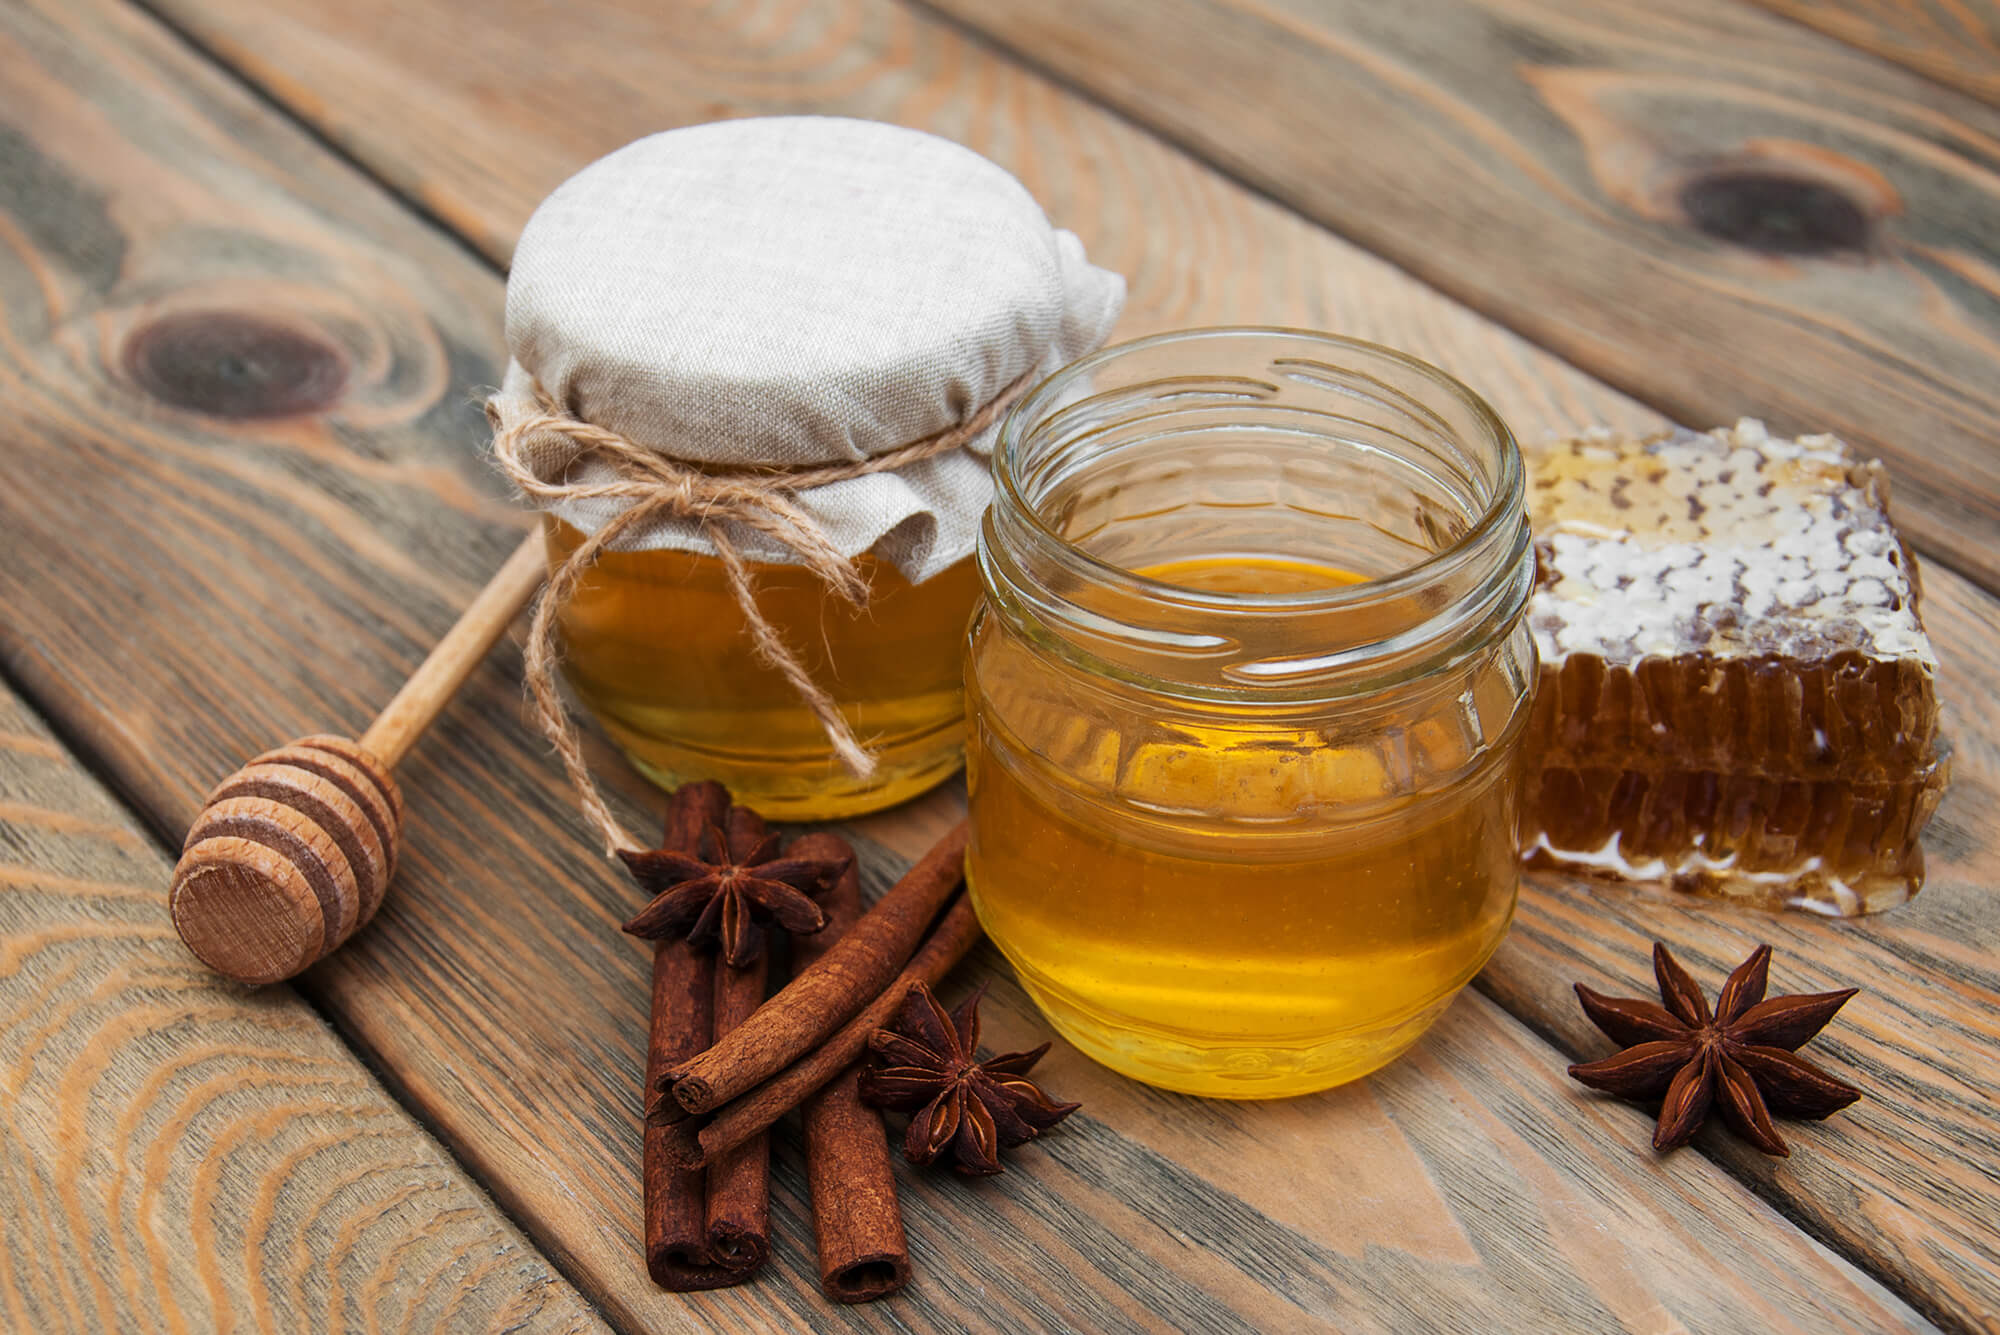 is honey and cinnamon good for your face